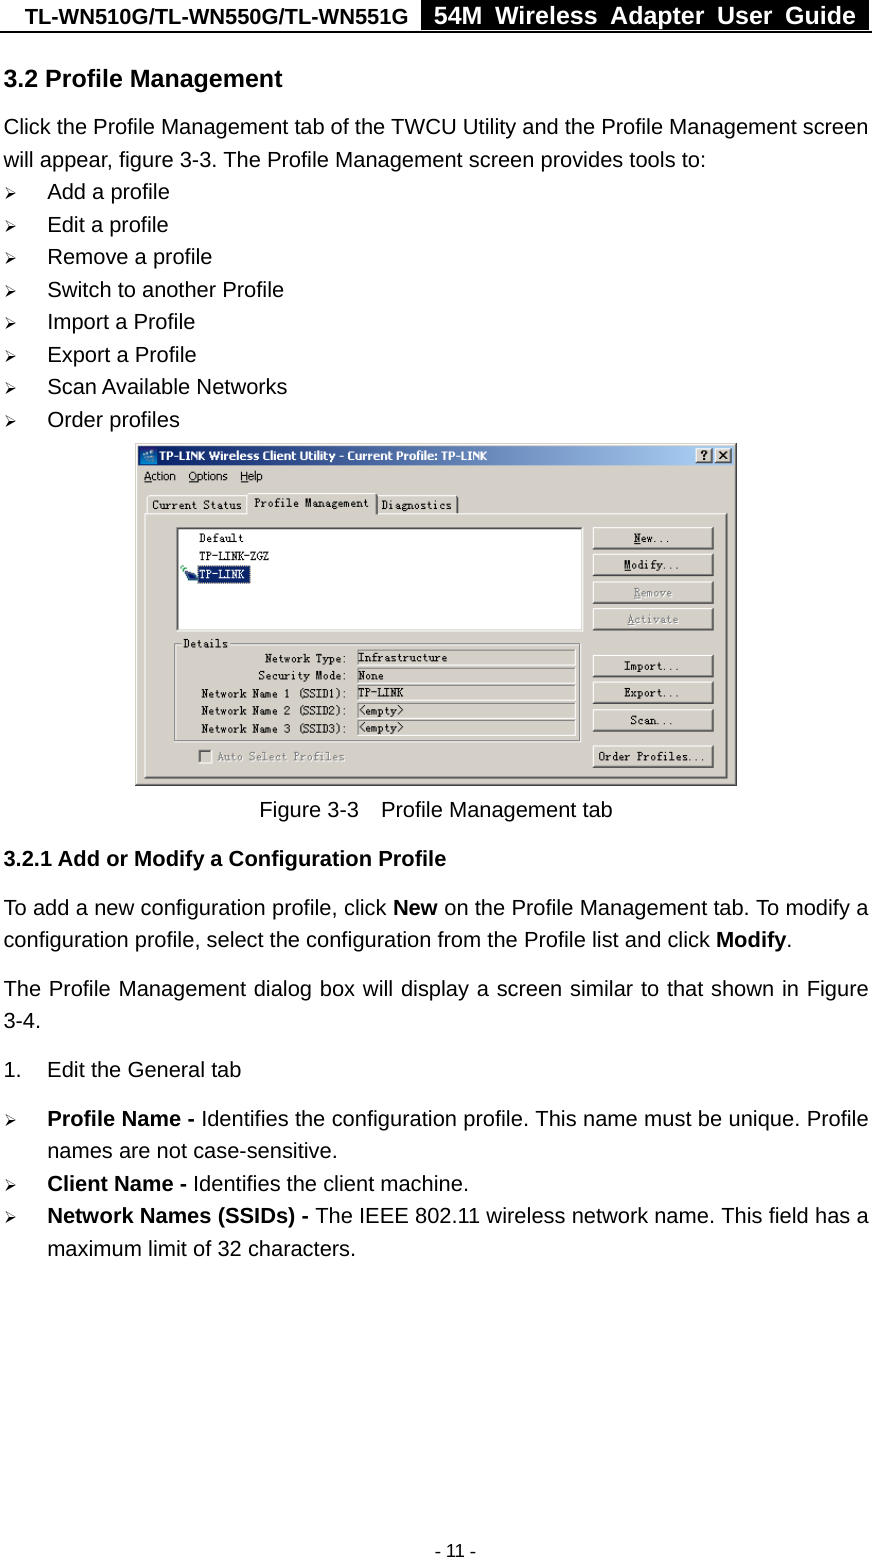 TL-WN510G/TL-WN550G/TL-WN551G  54M Wireless Adapter User Guide   - 11 -3.2 Profile Management Click the Profile Management tab of the TWCU Utility and the Profile Management screen will appear, figure 3-3. The Profile Management screen provides tools to: ¾ Add a profile ¾ Edit a profile ¾ Remove a profile ¾ Switch to another Profile ¾ Import a Profile ¾ Export a Profile ¾ Scan Available Networks ¾ Order profiles   Figure 3-3    Profile Management tab 3.2.1 Add or Modify a Configuration Profile To add a new configuration profile, click New on the Profile Management tab. To modify a configuration profile, select the configuration from the Profile list and click Modify. The Profile Management dialog box will display a screen similar to that shown in Figure 3-4. 1.  Edit the General tab ¾ Profile Name - Identifies the configuration profile. This name must be unique. Profile names are not case-sensitive. ¾ Client Name - Identifies the client machine. ¾ Network Names (SSIDs) - The IEEE 802.11 wireless network name. This field has a maximum limit of 32 characters. 